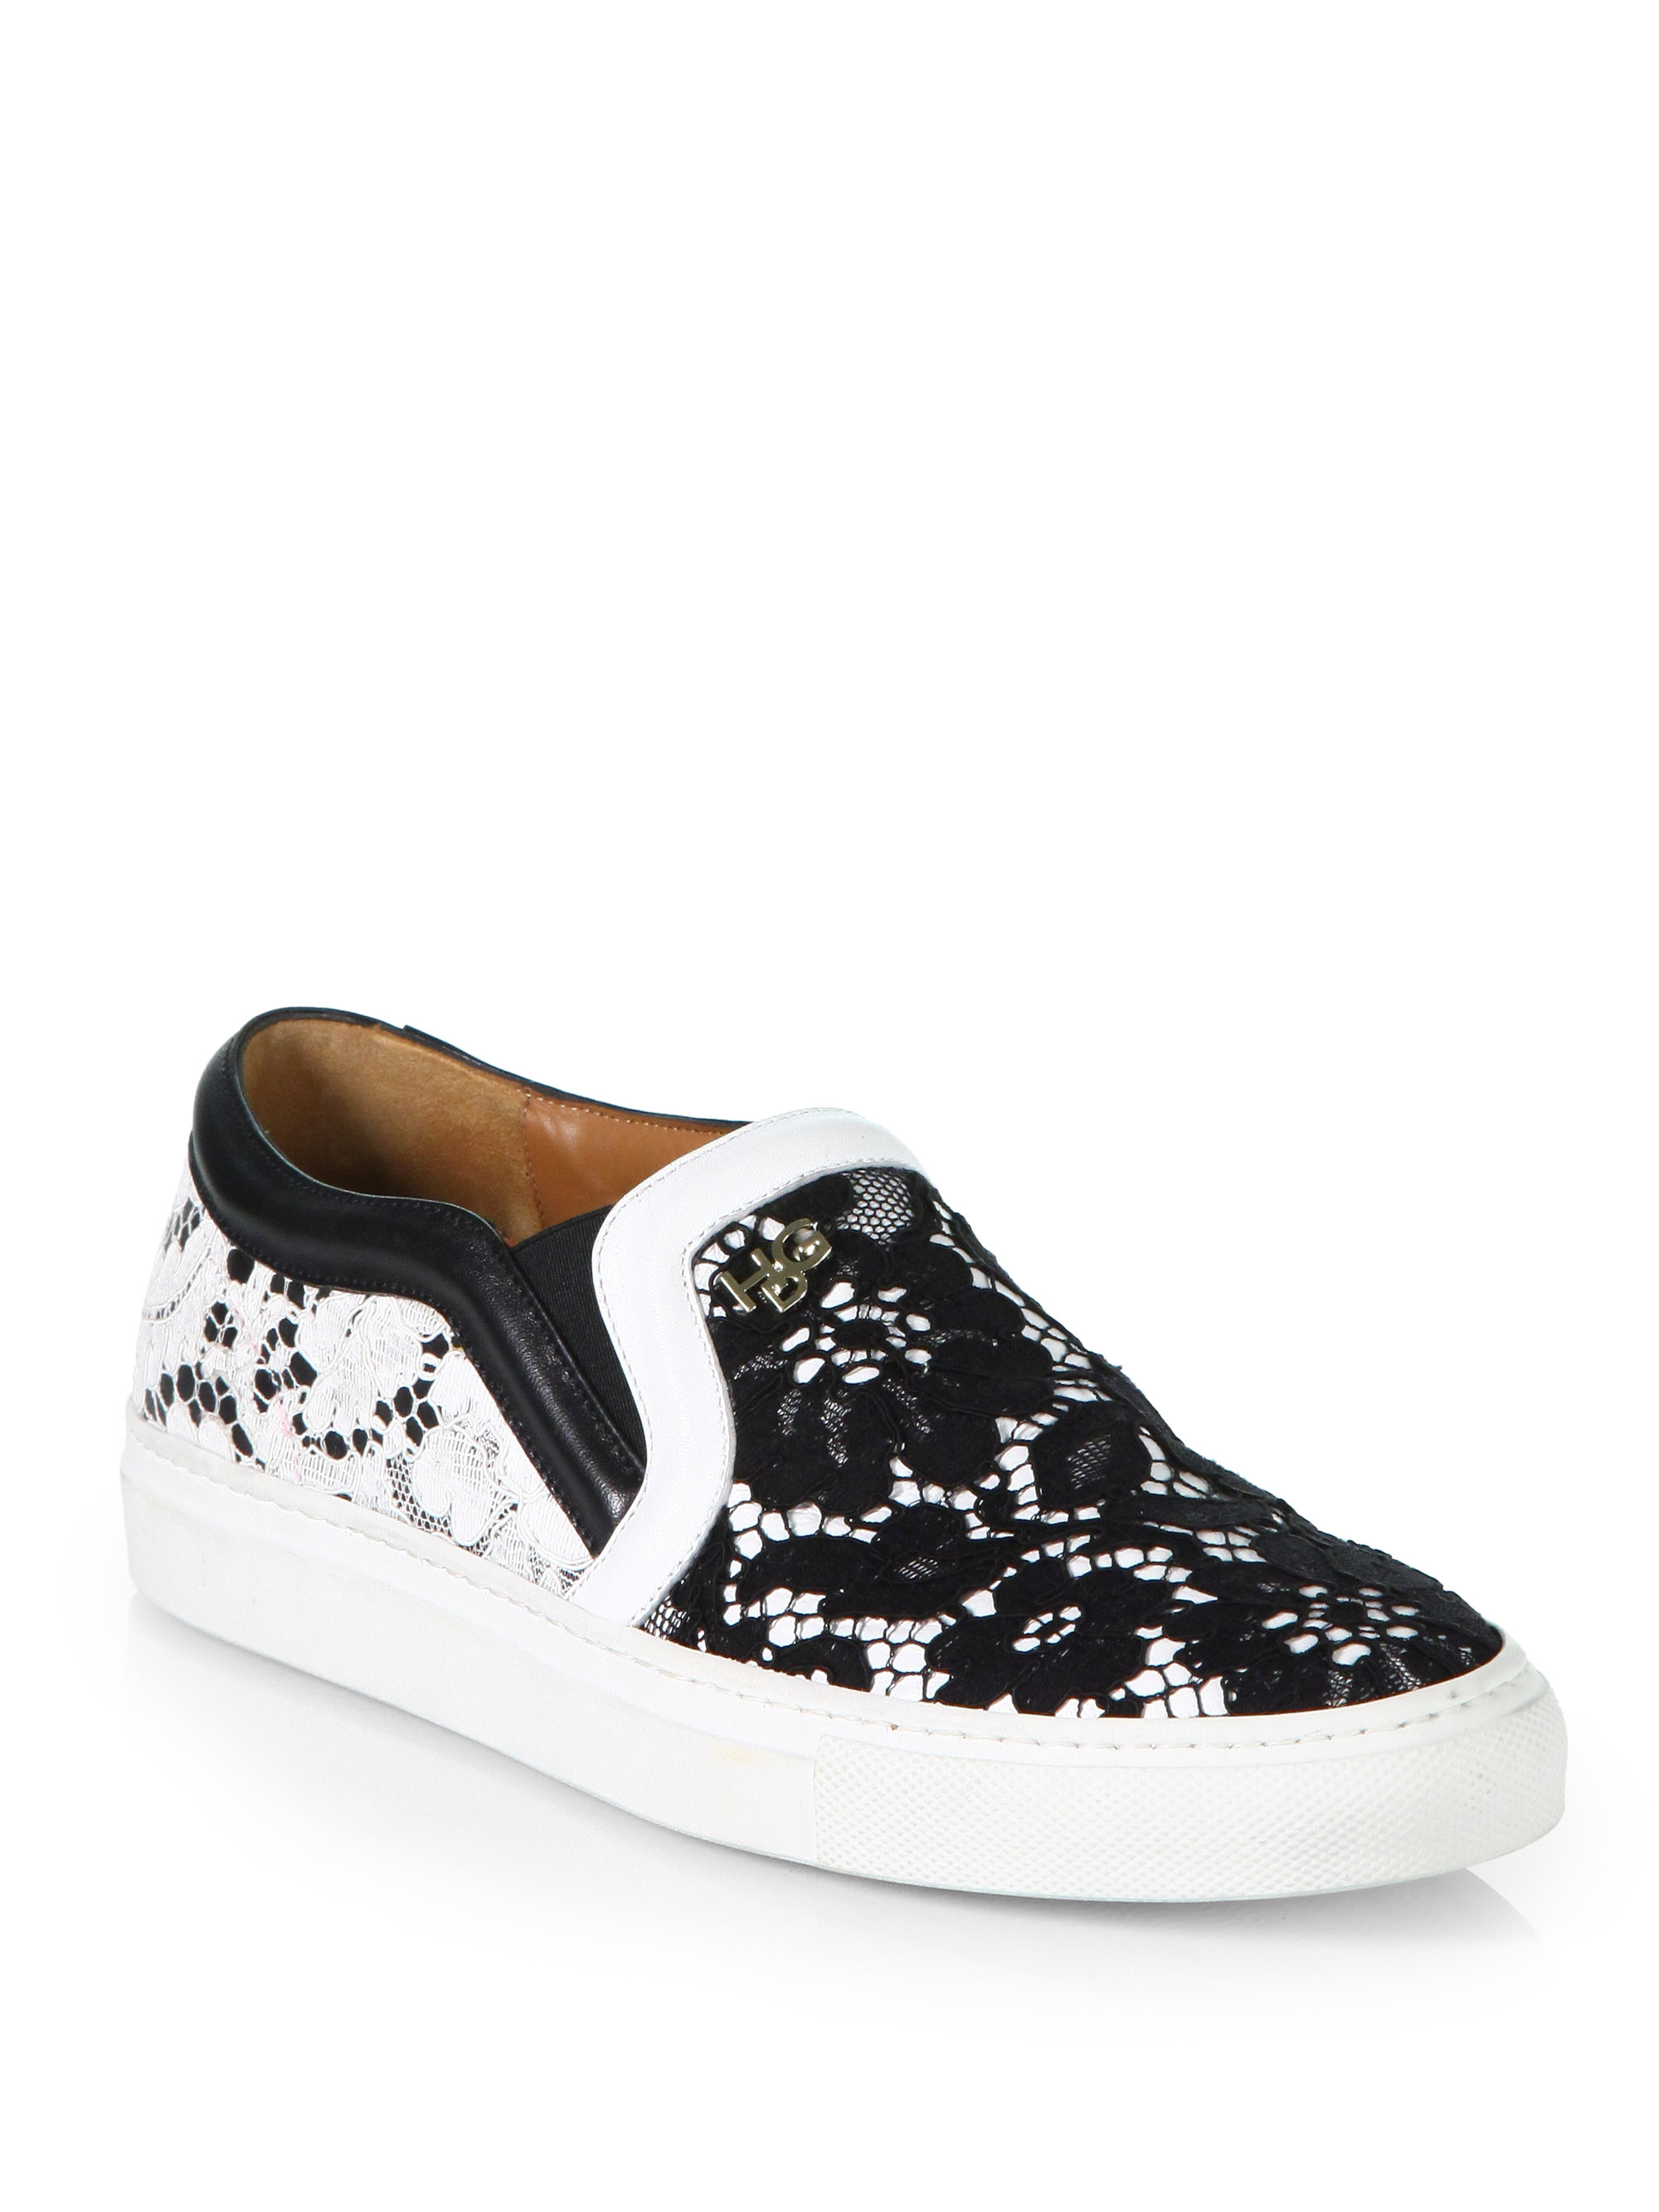 Givenchy Floral Lace Slipon Sneakers in White (black white) | Lyst